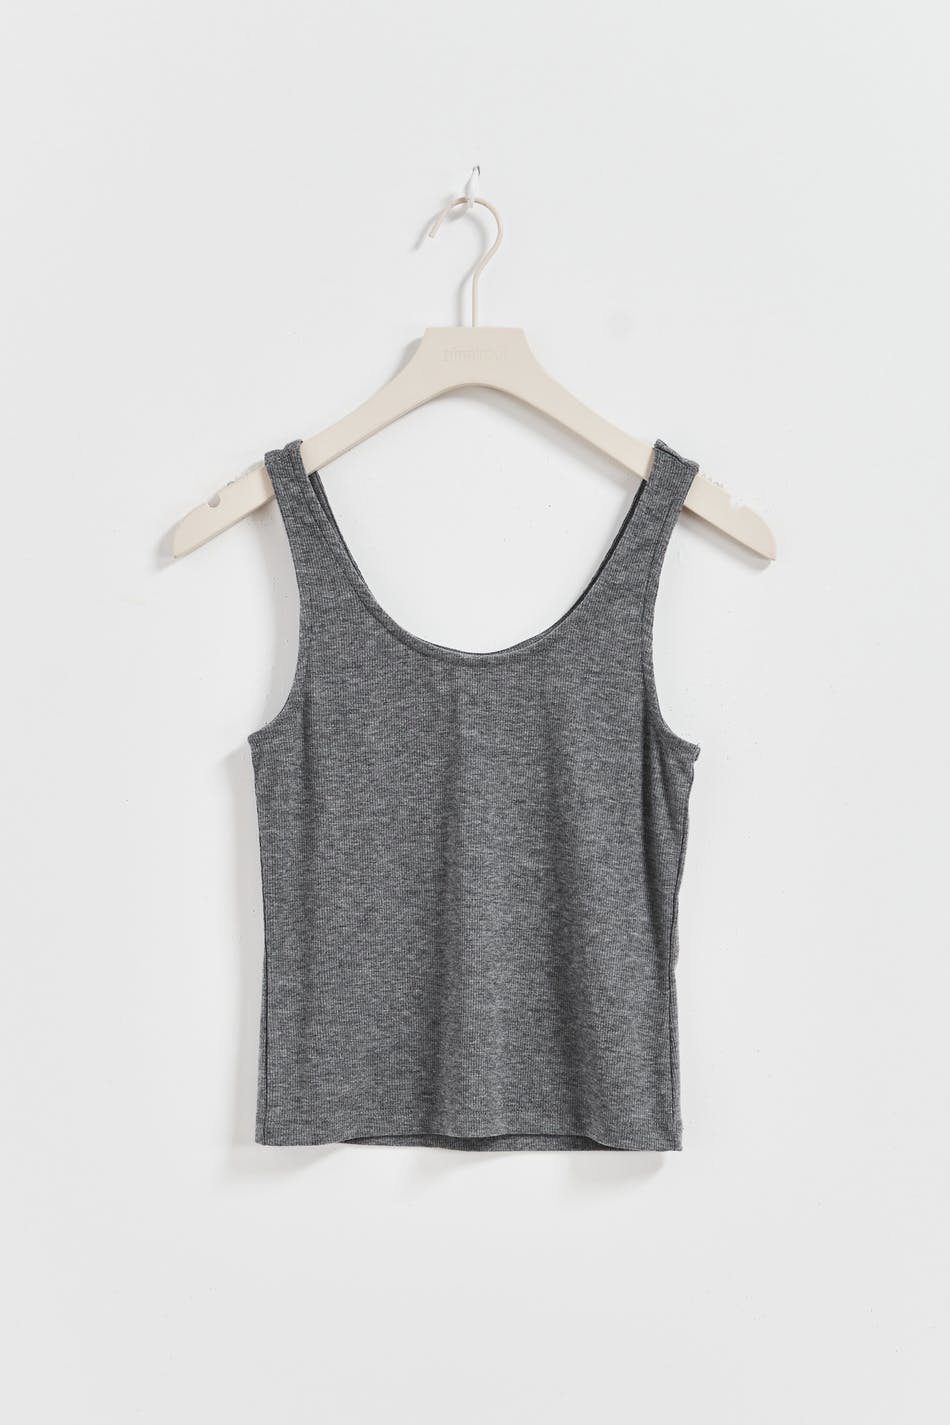 Women's Relaxed-Fit TriBlend Moisture-Wicking Yoga Tank Top, Extra-Small  Deepest Grey